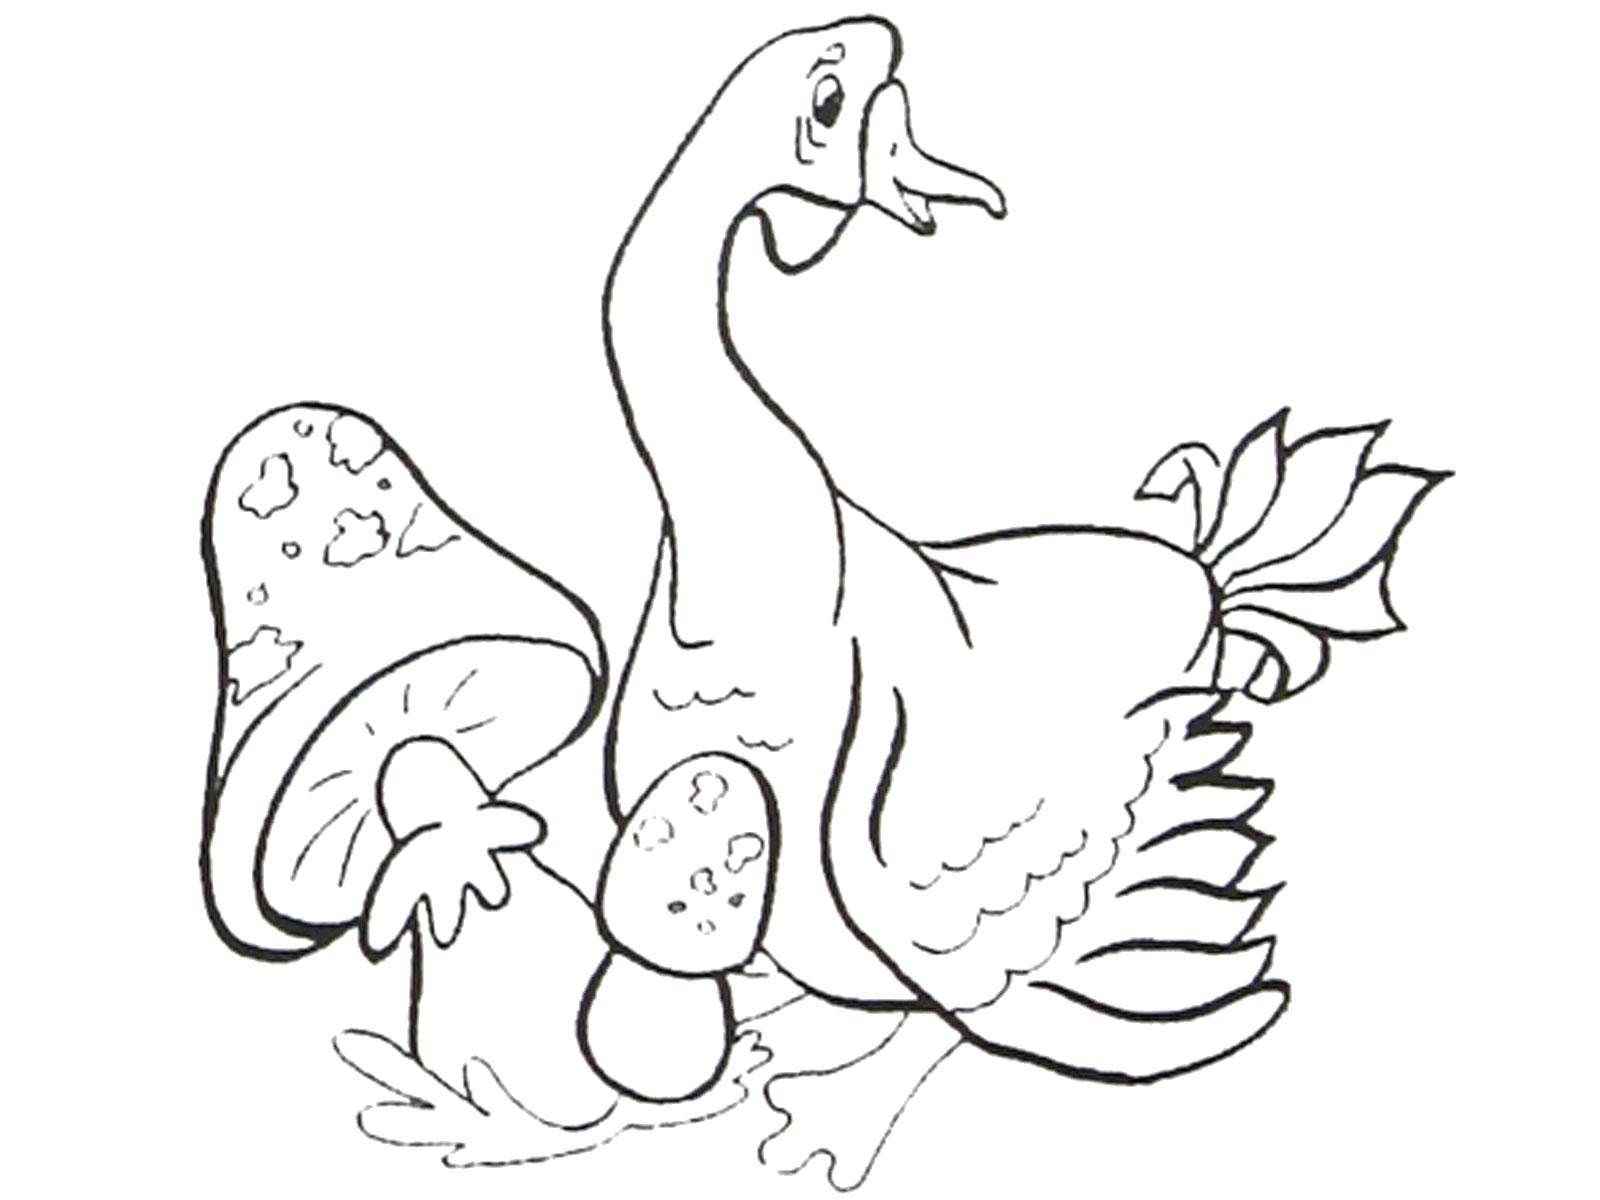 Coloring Goose the mushrooms. Category Pets allowed. Tags:  Birds.